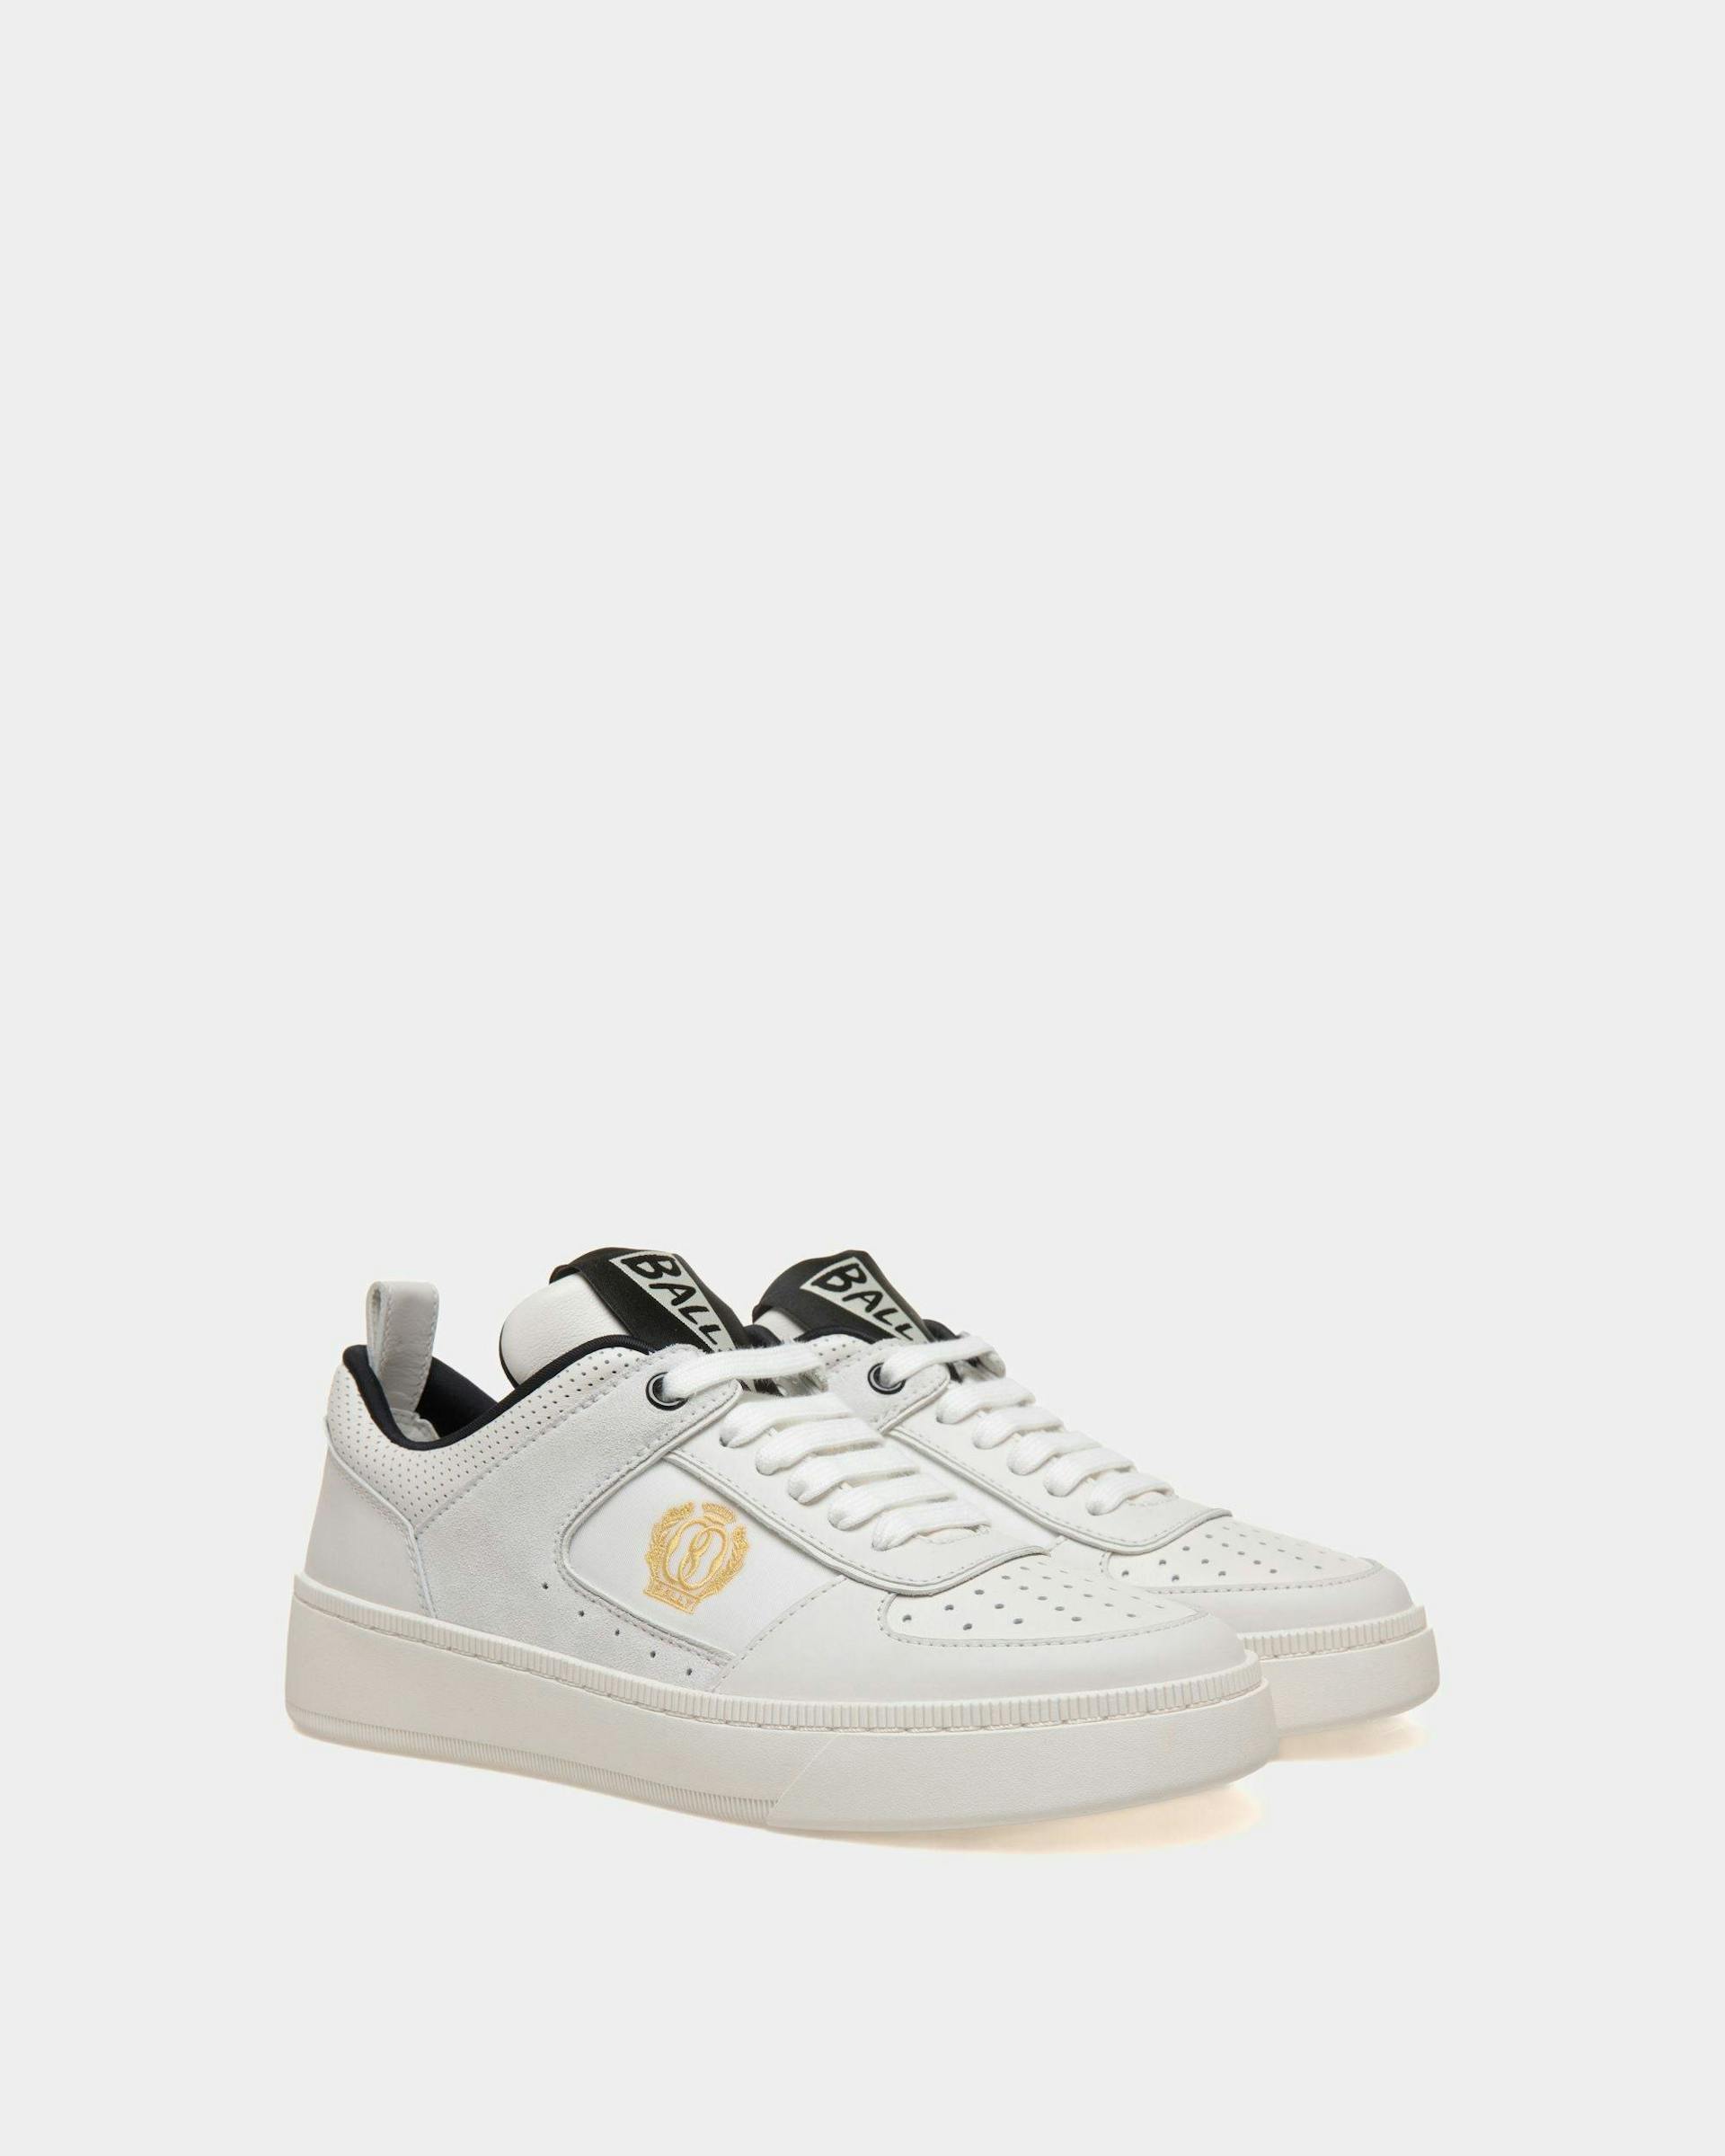 Raise | Women's Sneaker in White And Black Leather | Bally